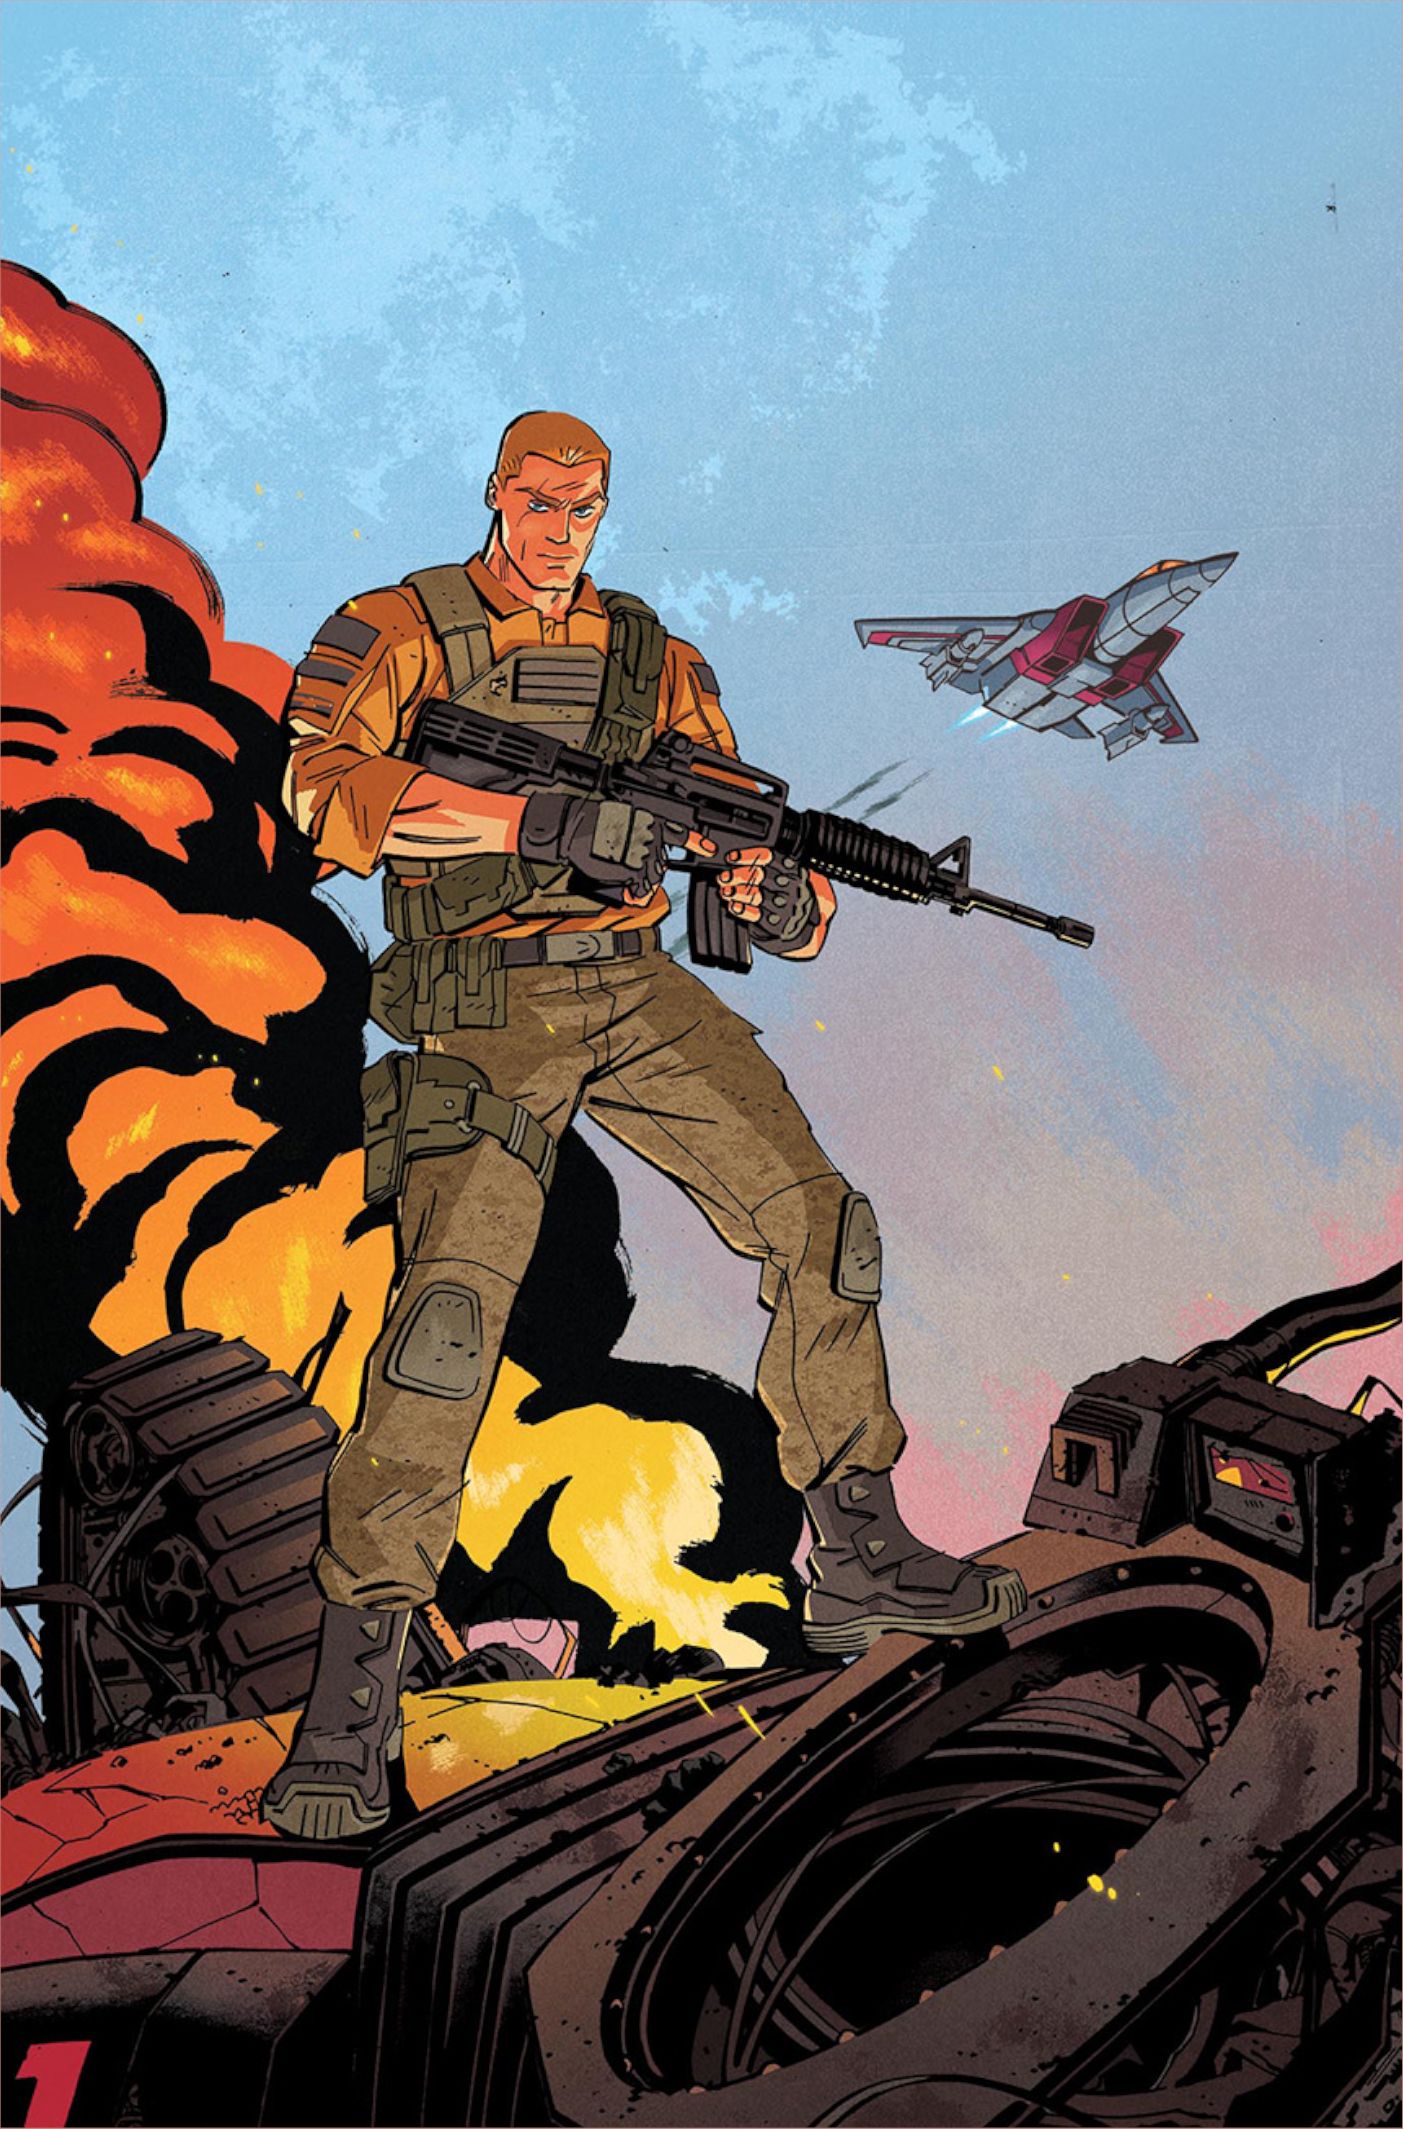 Duke #1 by Tom Reilly, Duke standing amongst wreckage with Starscream as a jet in the background